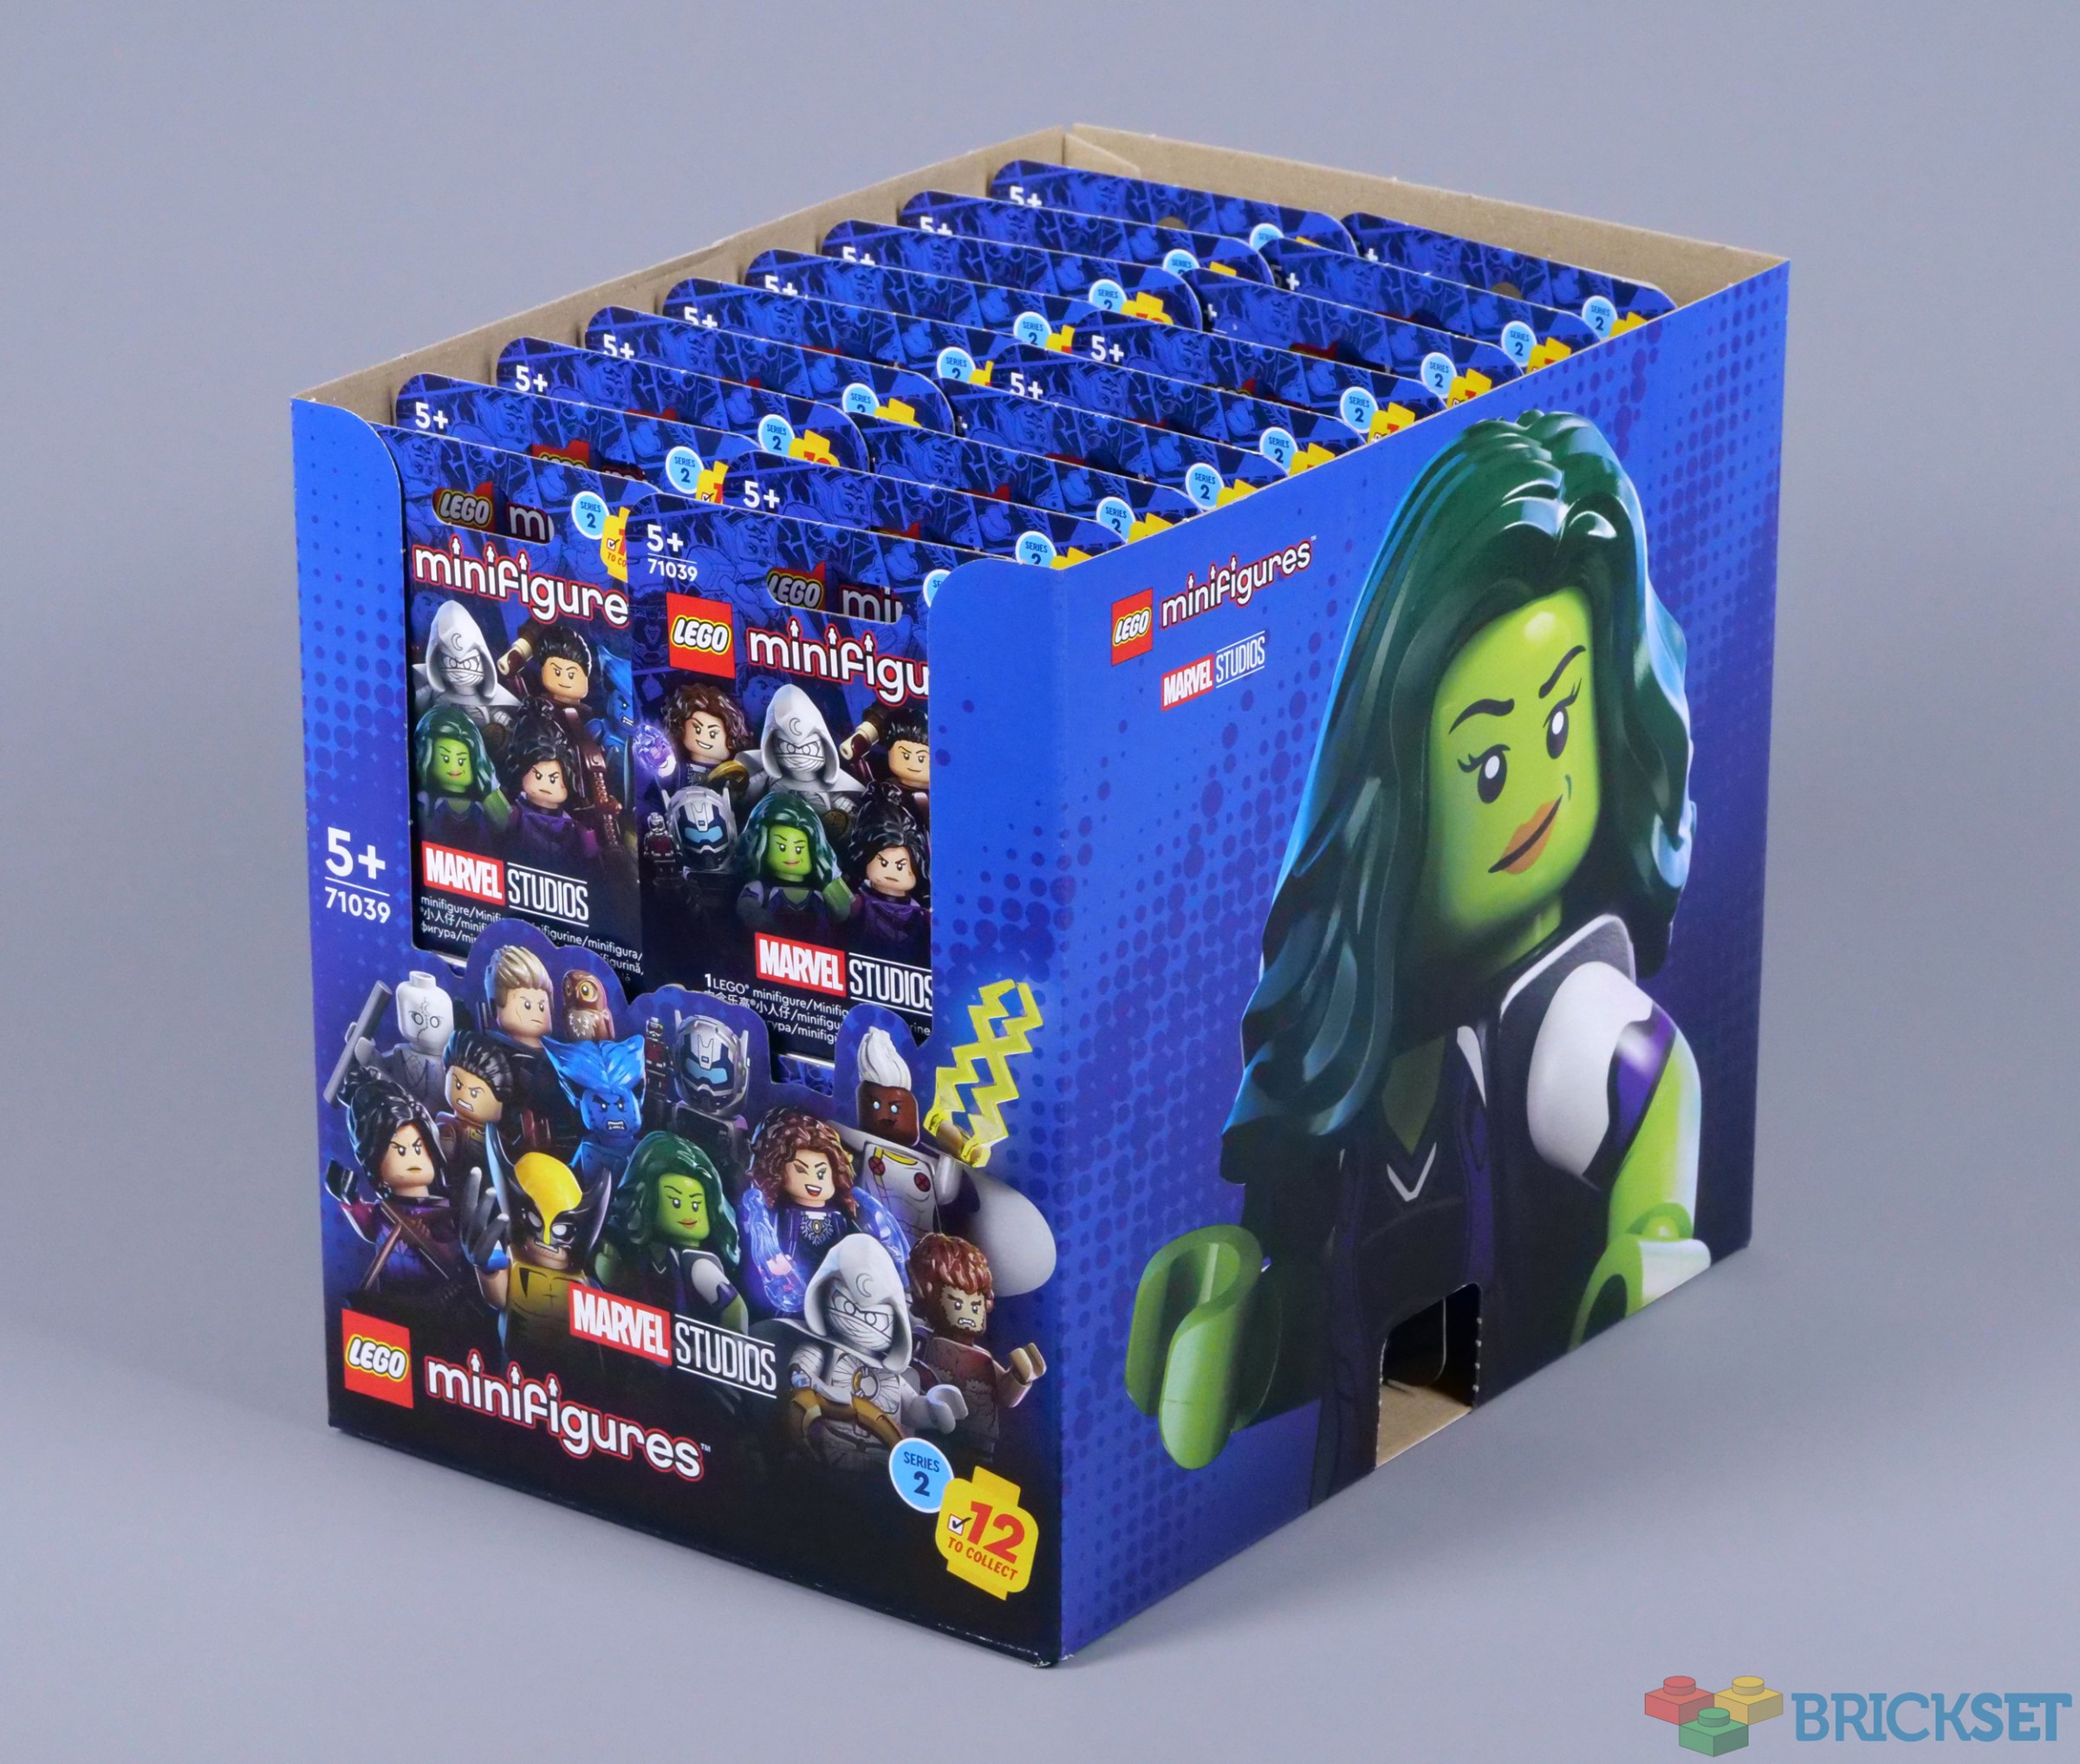 Here are all 20 minifigs from The LEGO Batman Movie Minifigure Series -  Jay's Brick Blog